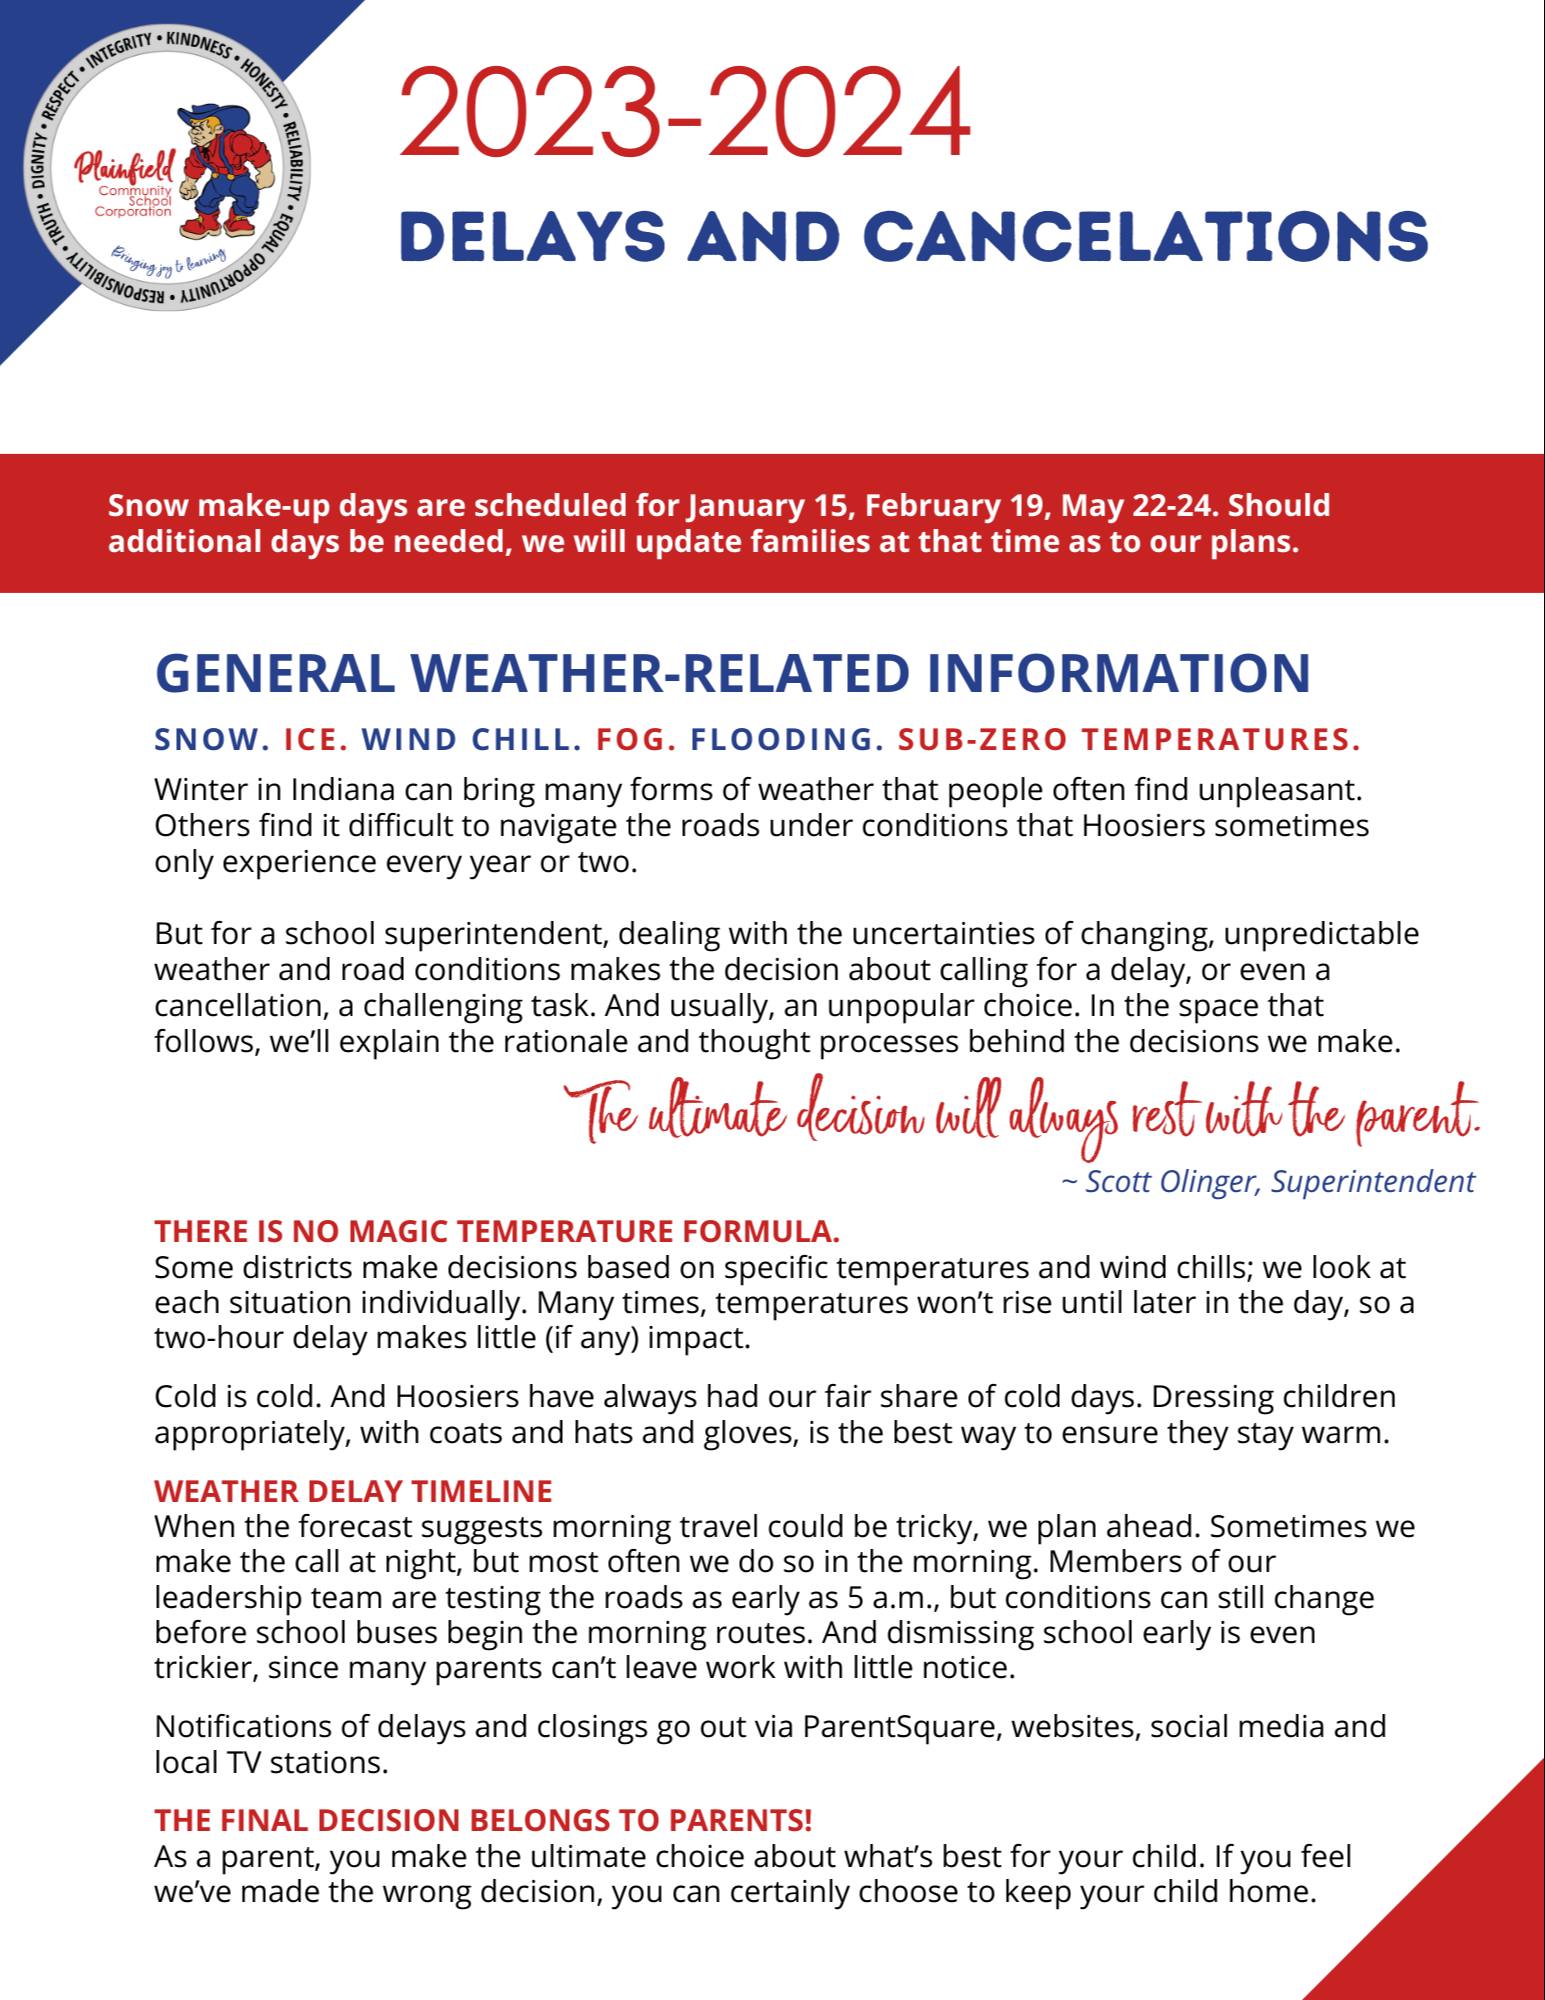 2023-2024 Delays and Cancelations